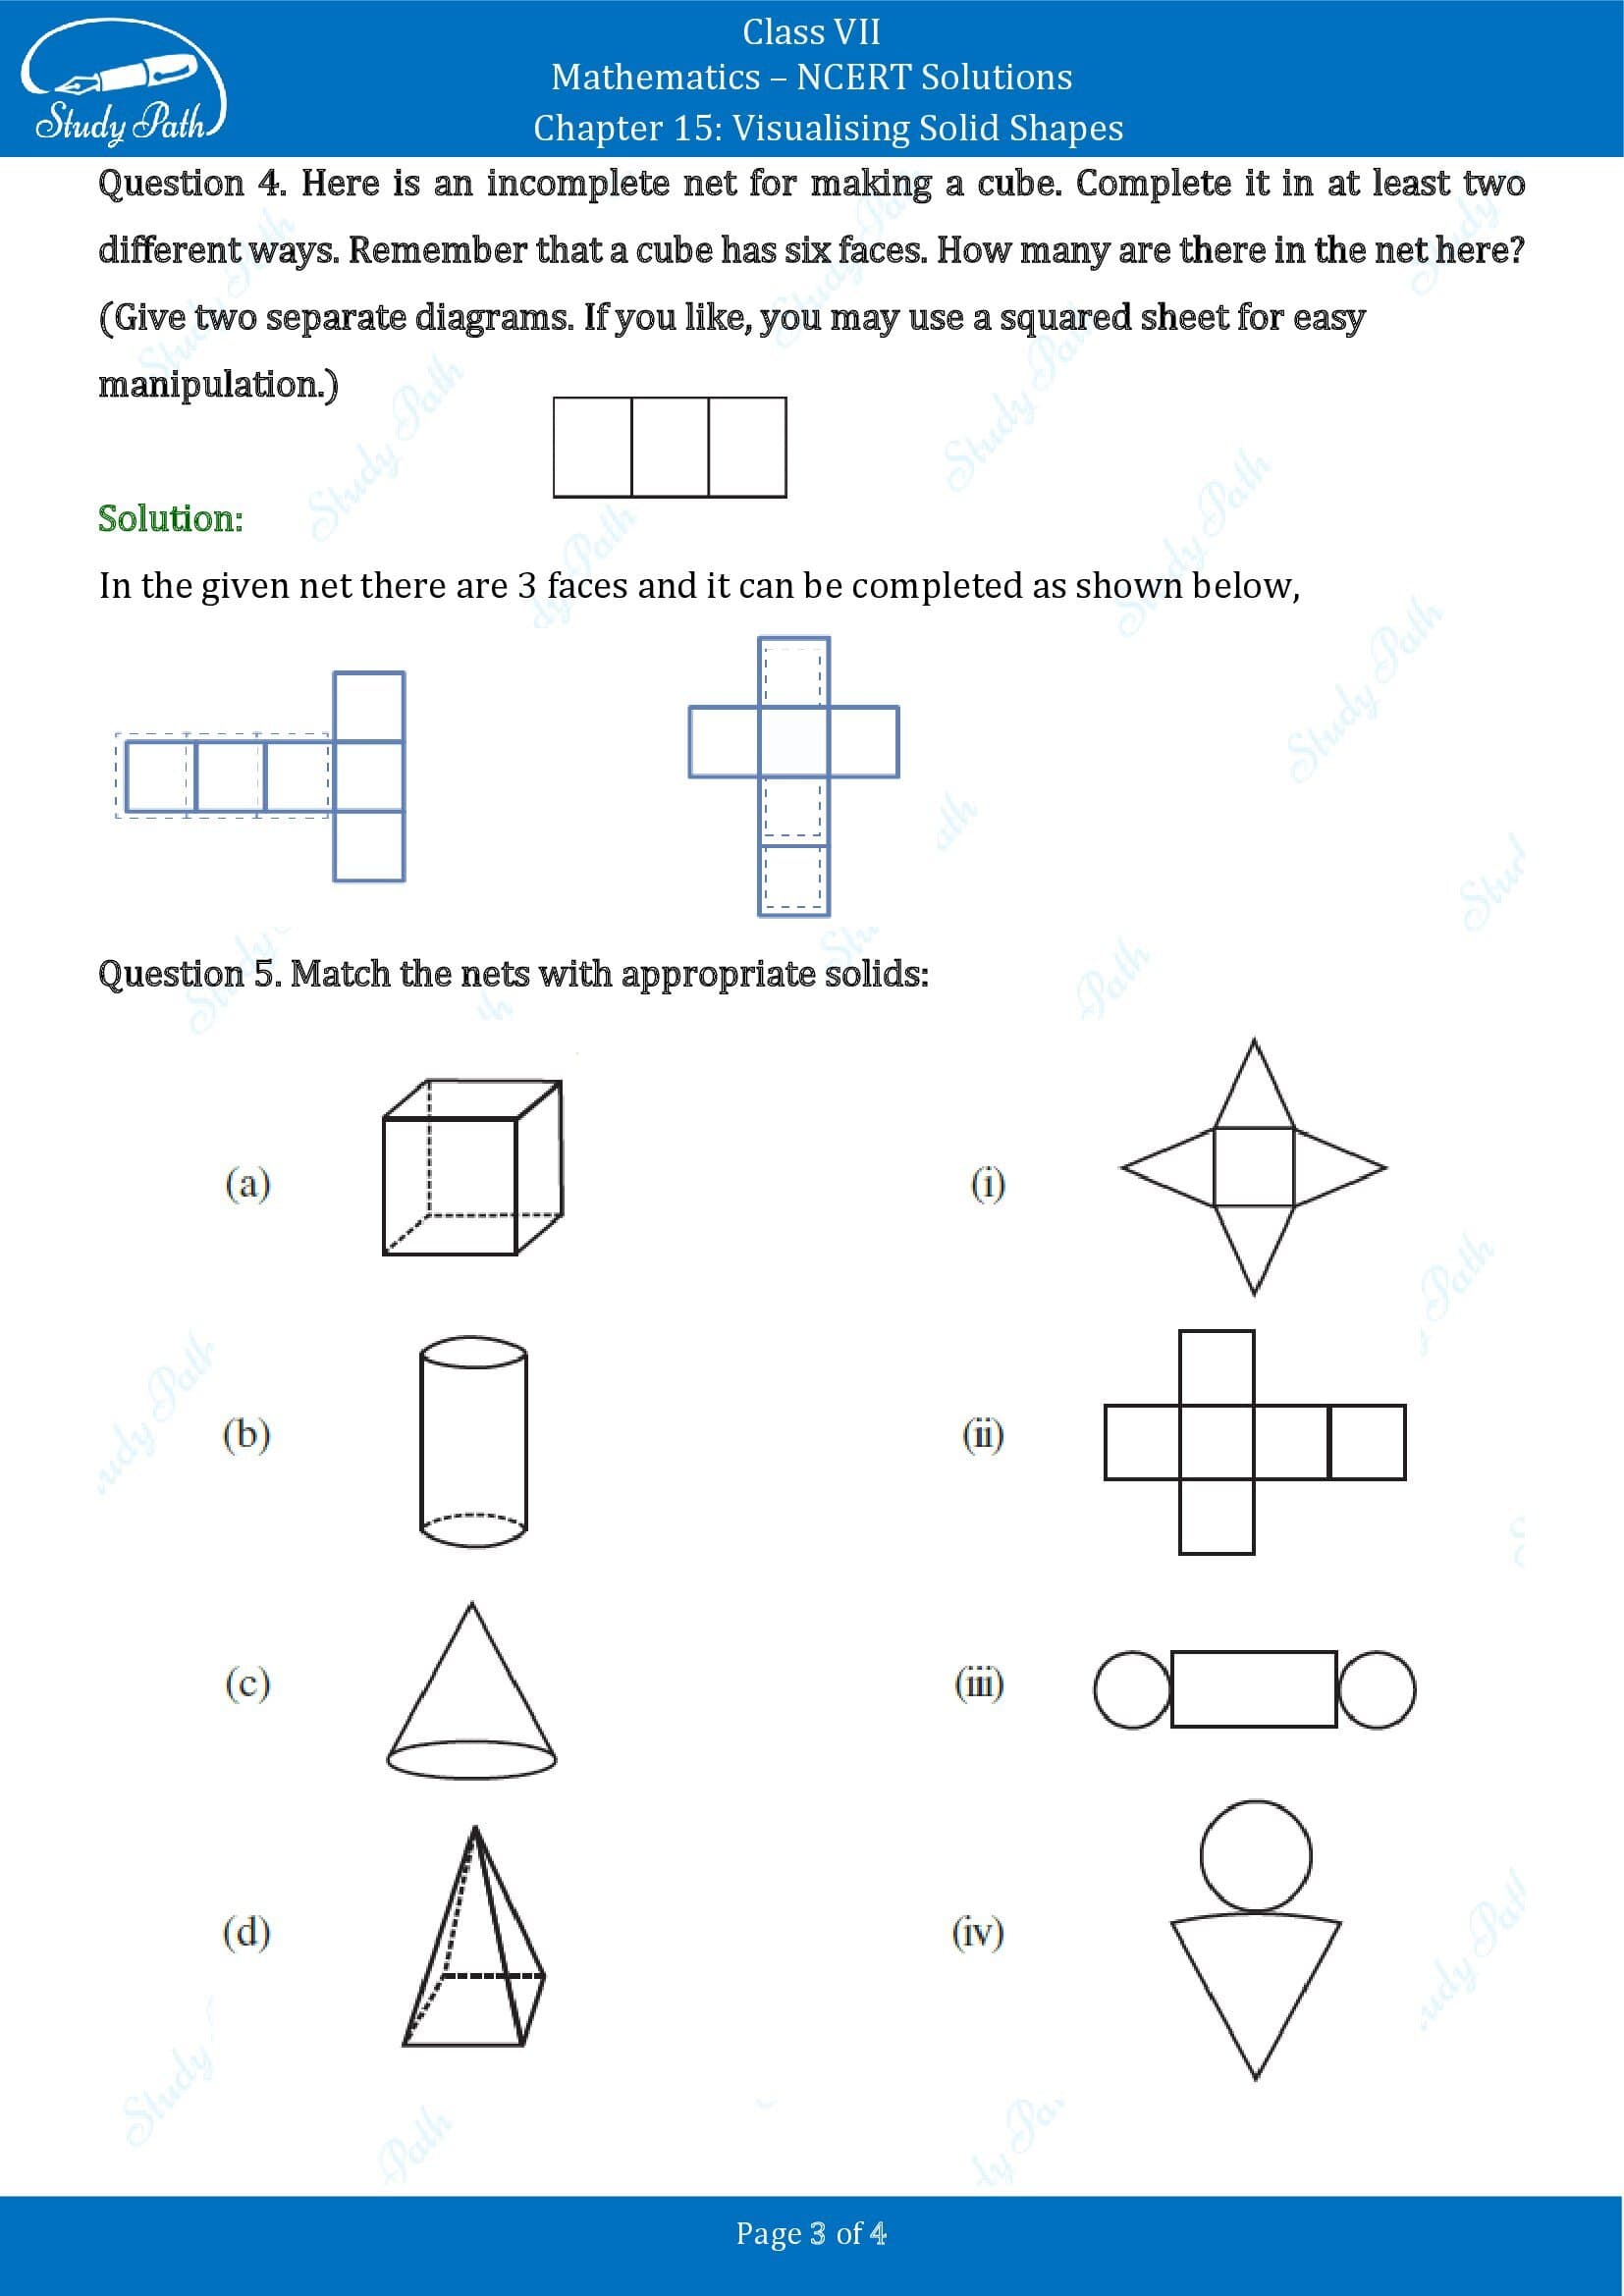 NCERT Solutions For Class 7 Maths Chapter 15 Visualising Solid Shapes Study Path